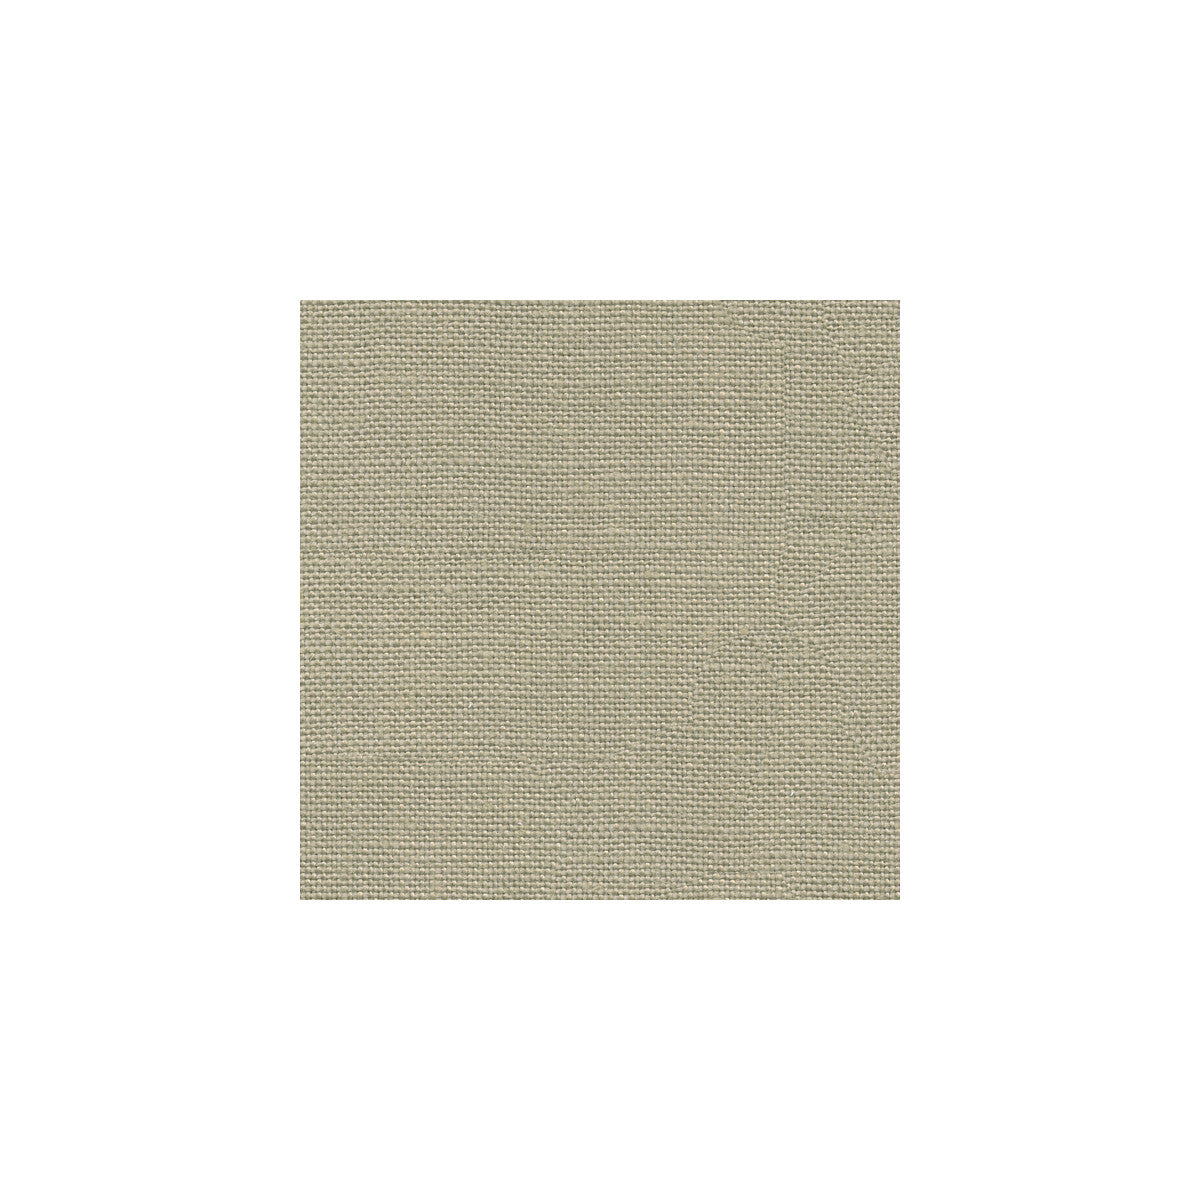 Madison Linen fabric in ash color - pattern 32330.11.0 - by Kravet Design in the Gis collection